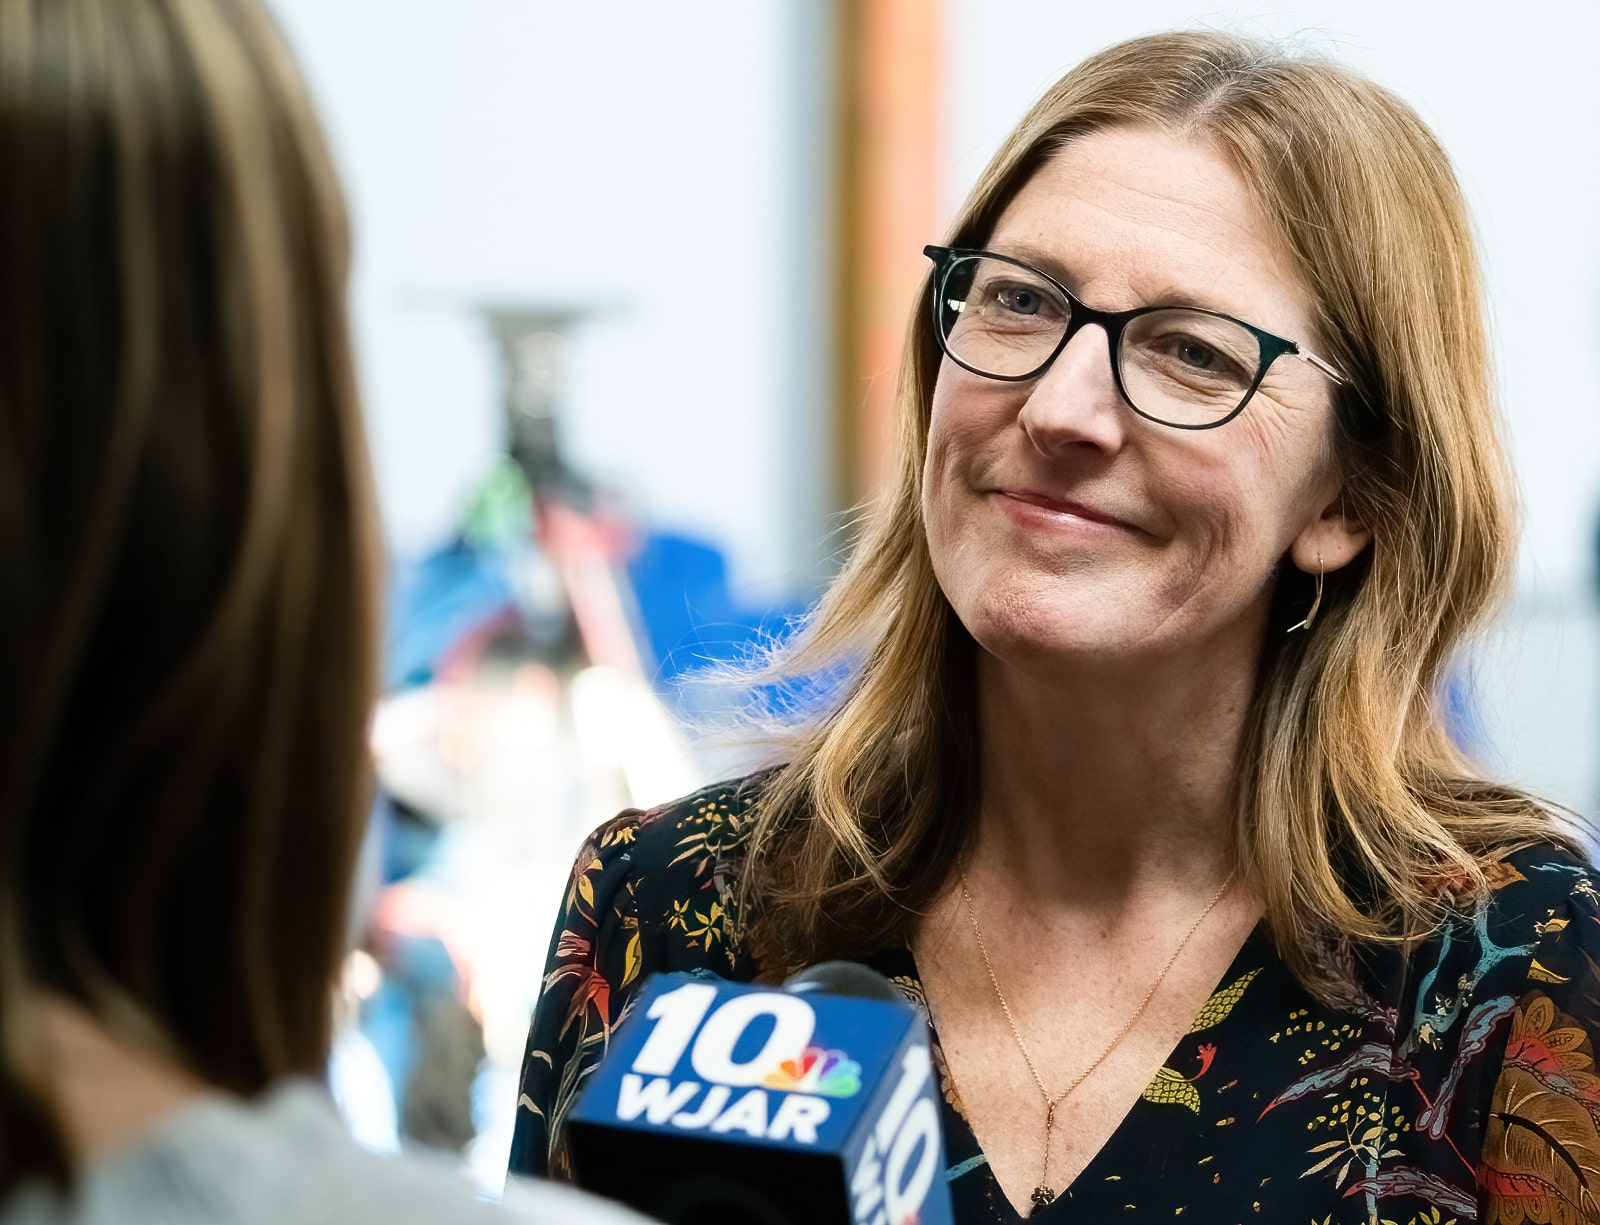 Jennifer Hawkins, Executive Director of ONE Neighborhood Builders, speaks to a reporter at the Roadmap release event on Monday, March 27, 2023